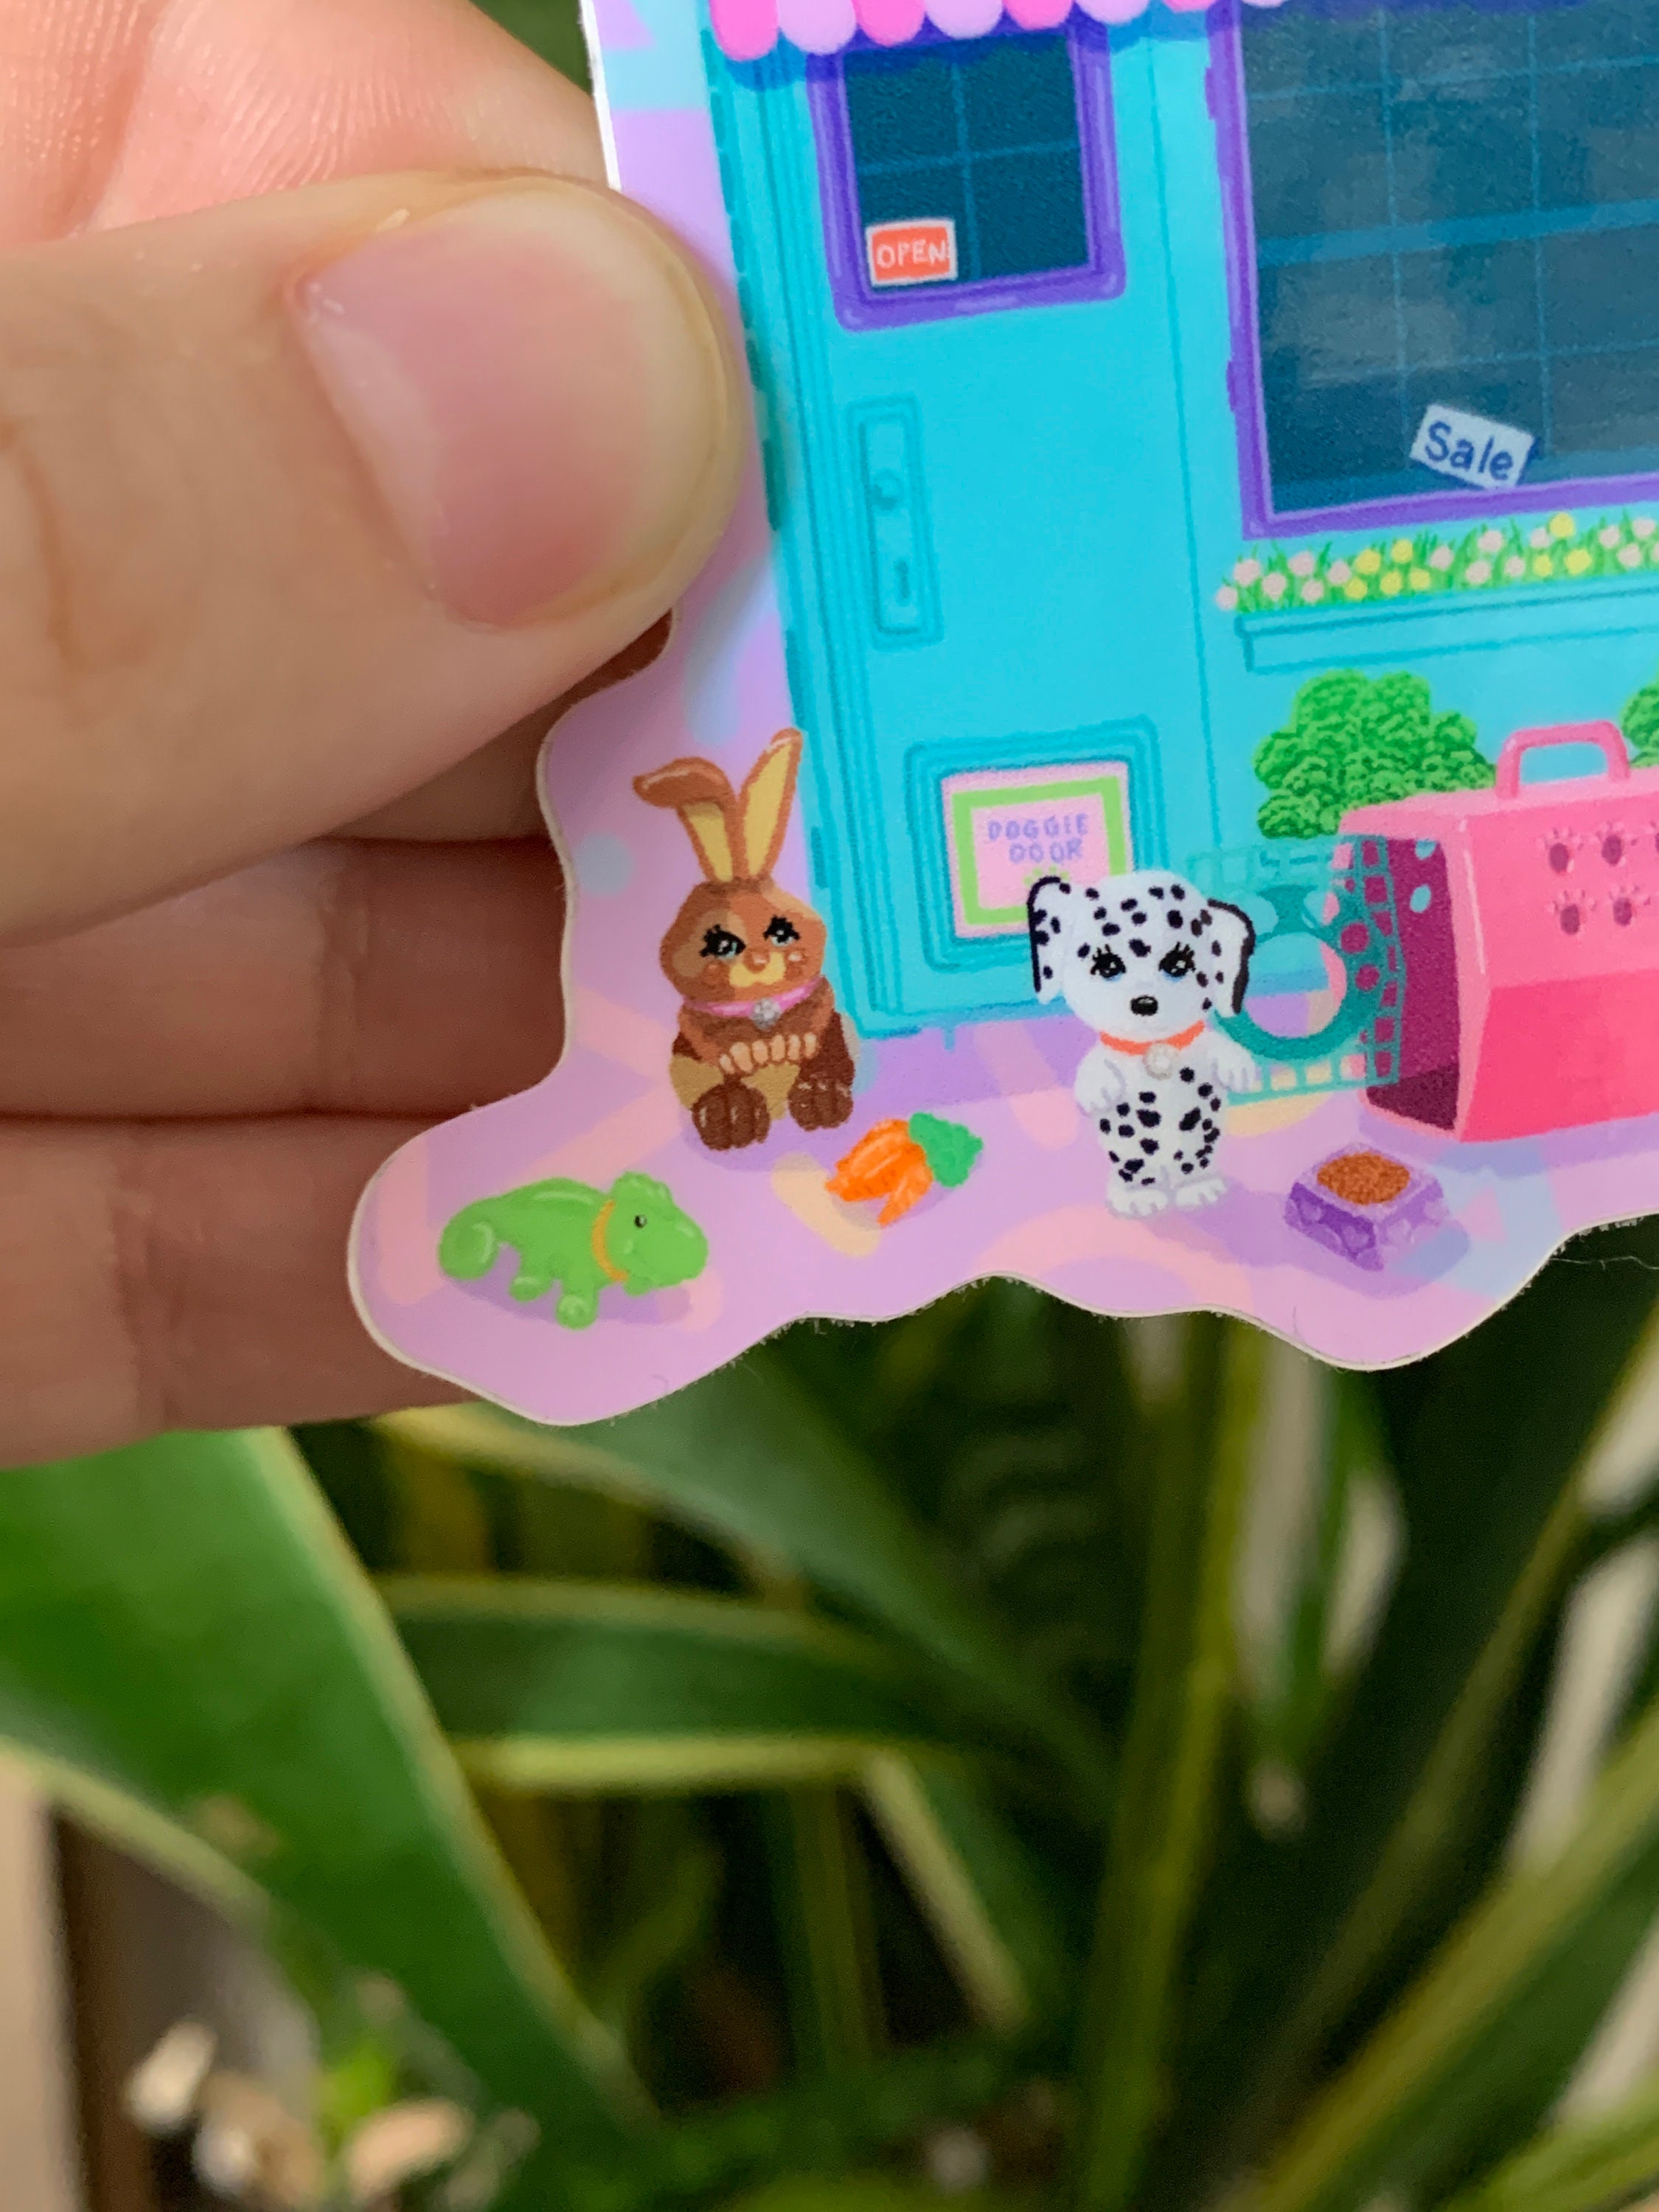 Littlest Pet Shop Vintage Sticker 90s Nostalgia Gift for 90's Kids Pastel  80's and 90's Toys Perfect for Vintage Toy Collectors 